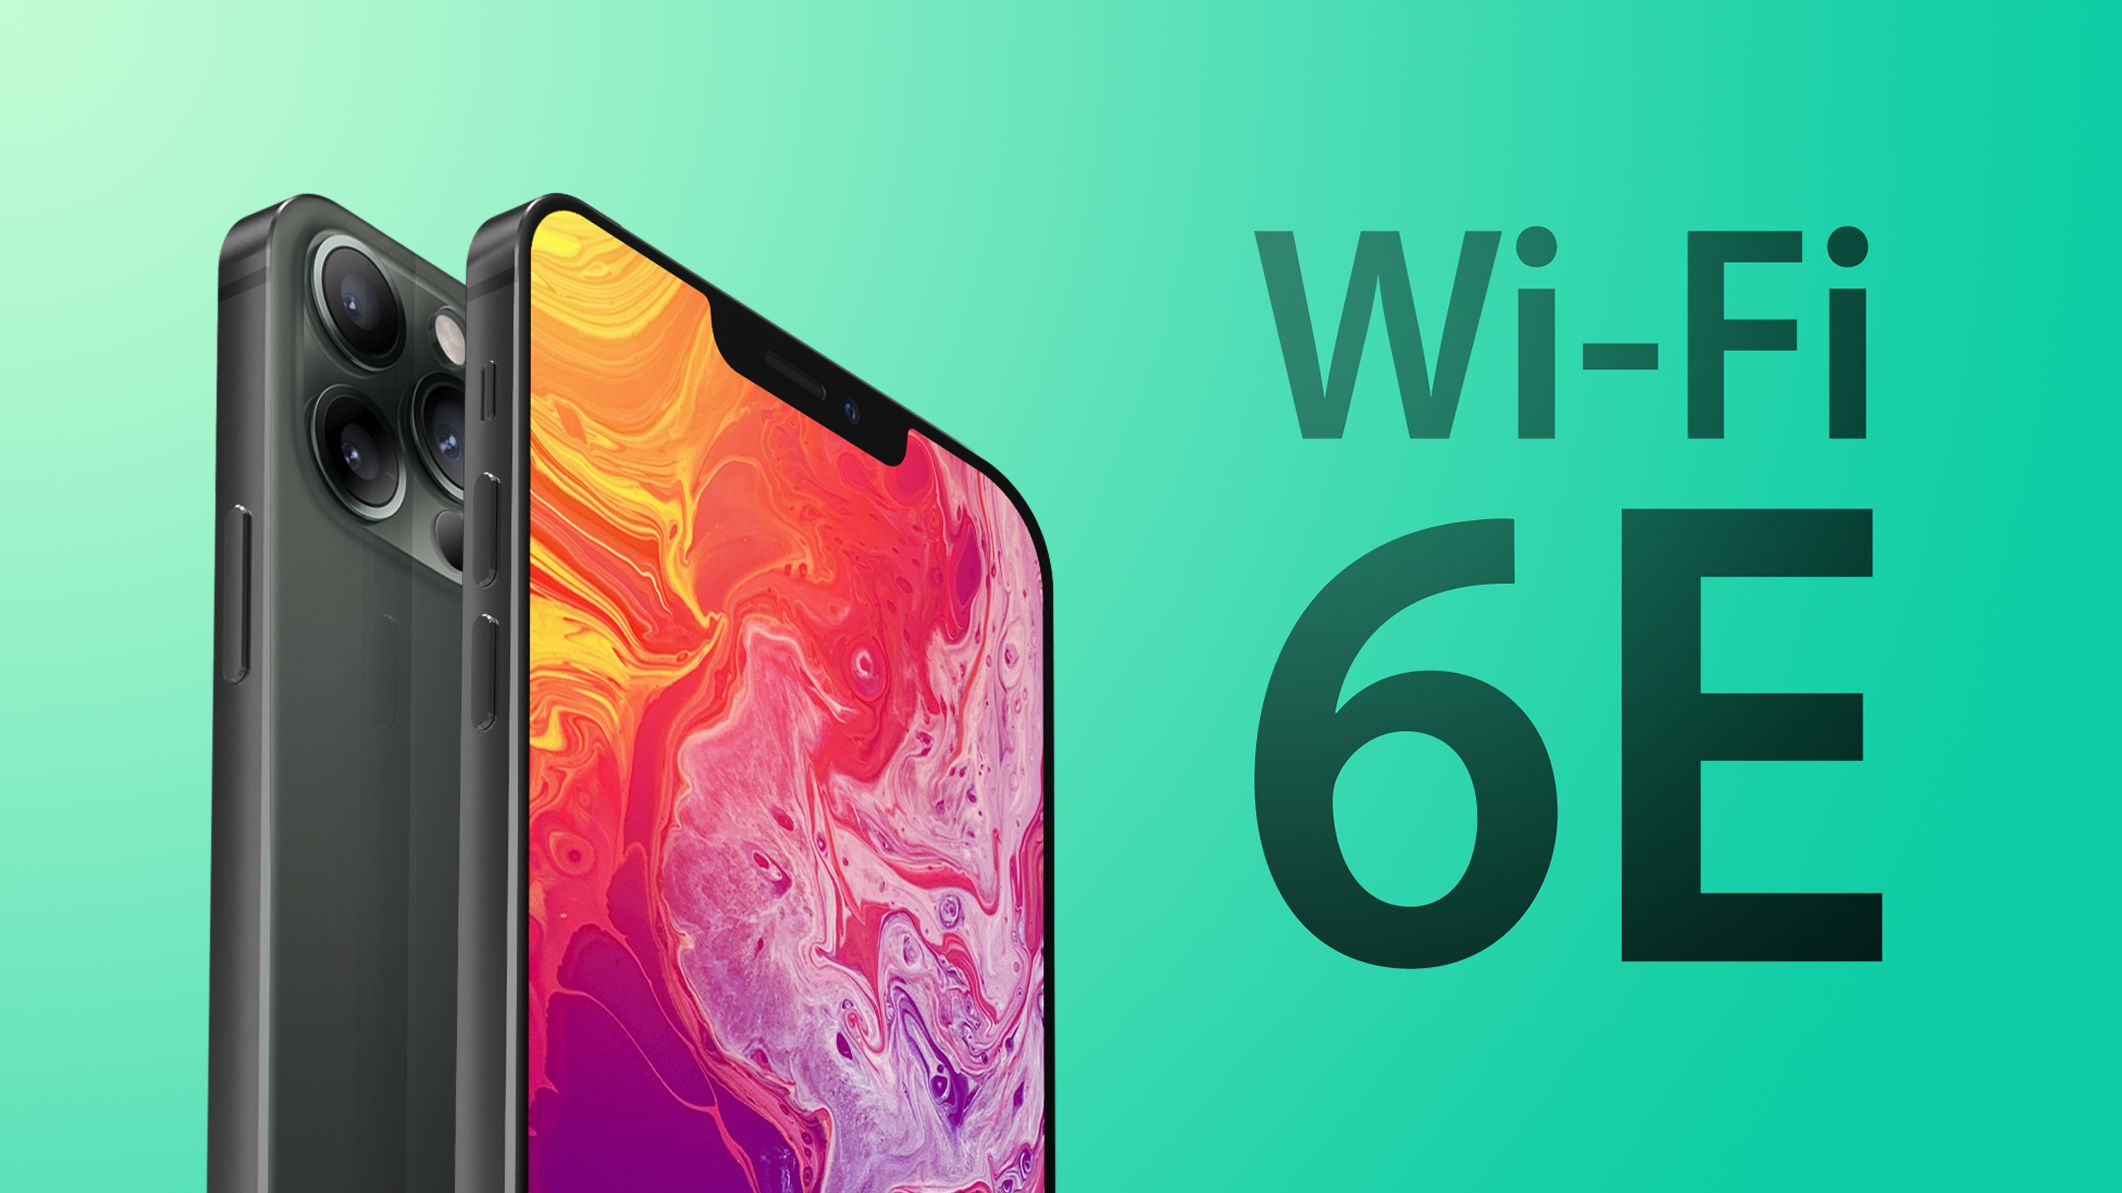 It is rumored again that the iPhone 13 models will support Wi-Fi 6E faster